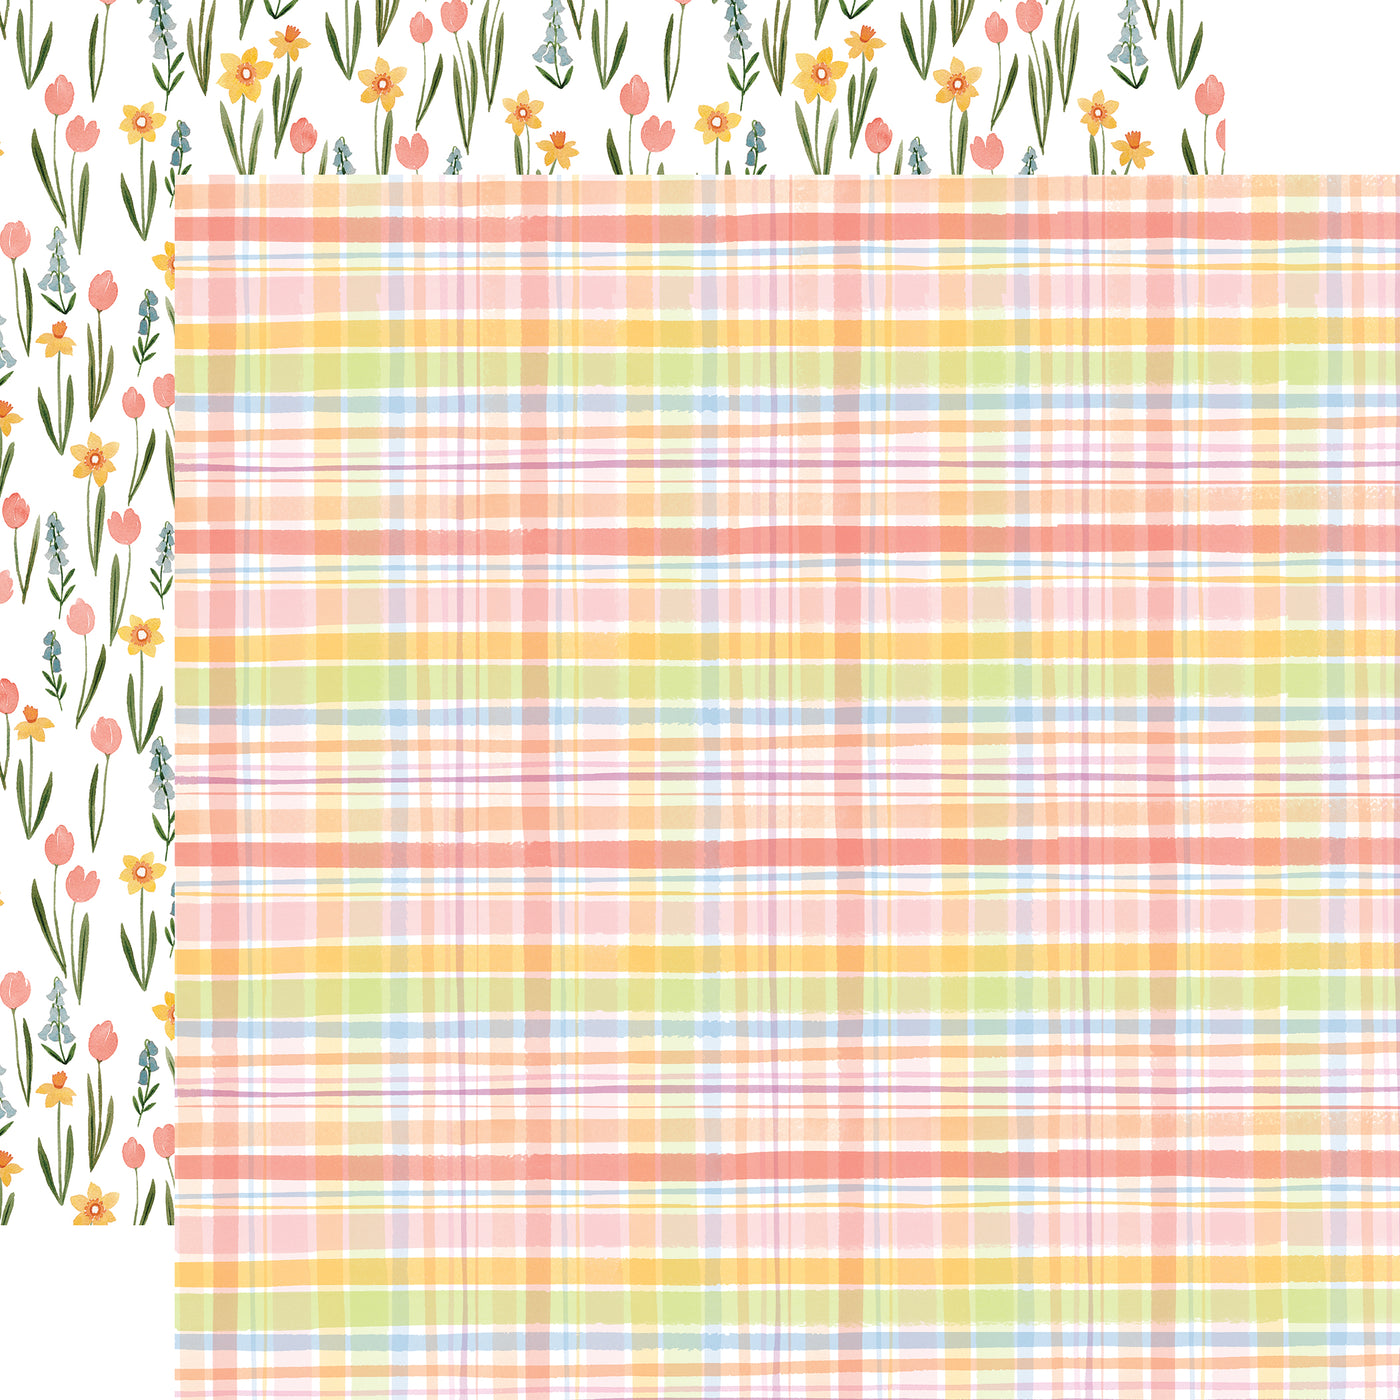 The front side of this paper is a pastel plaid design and the reverse side is full of small springtime flowers in a variety of colors.